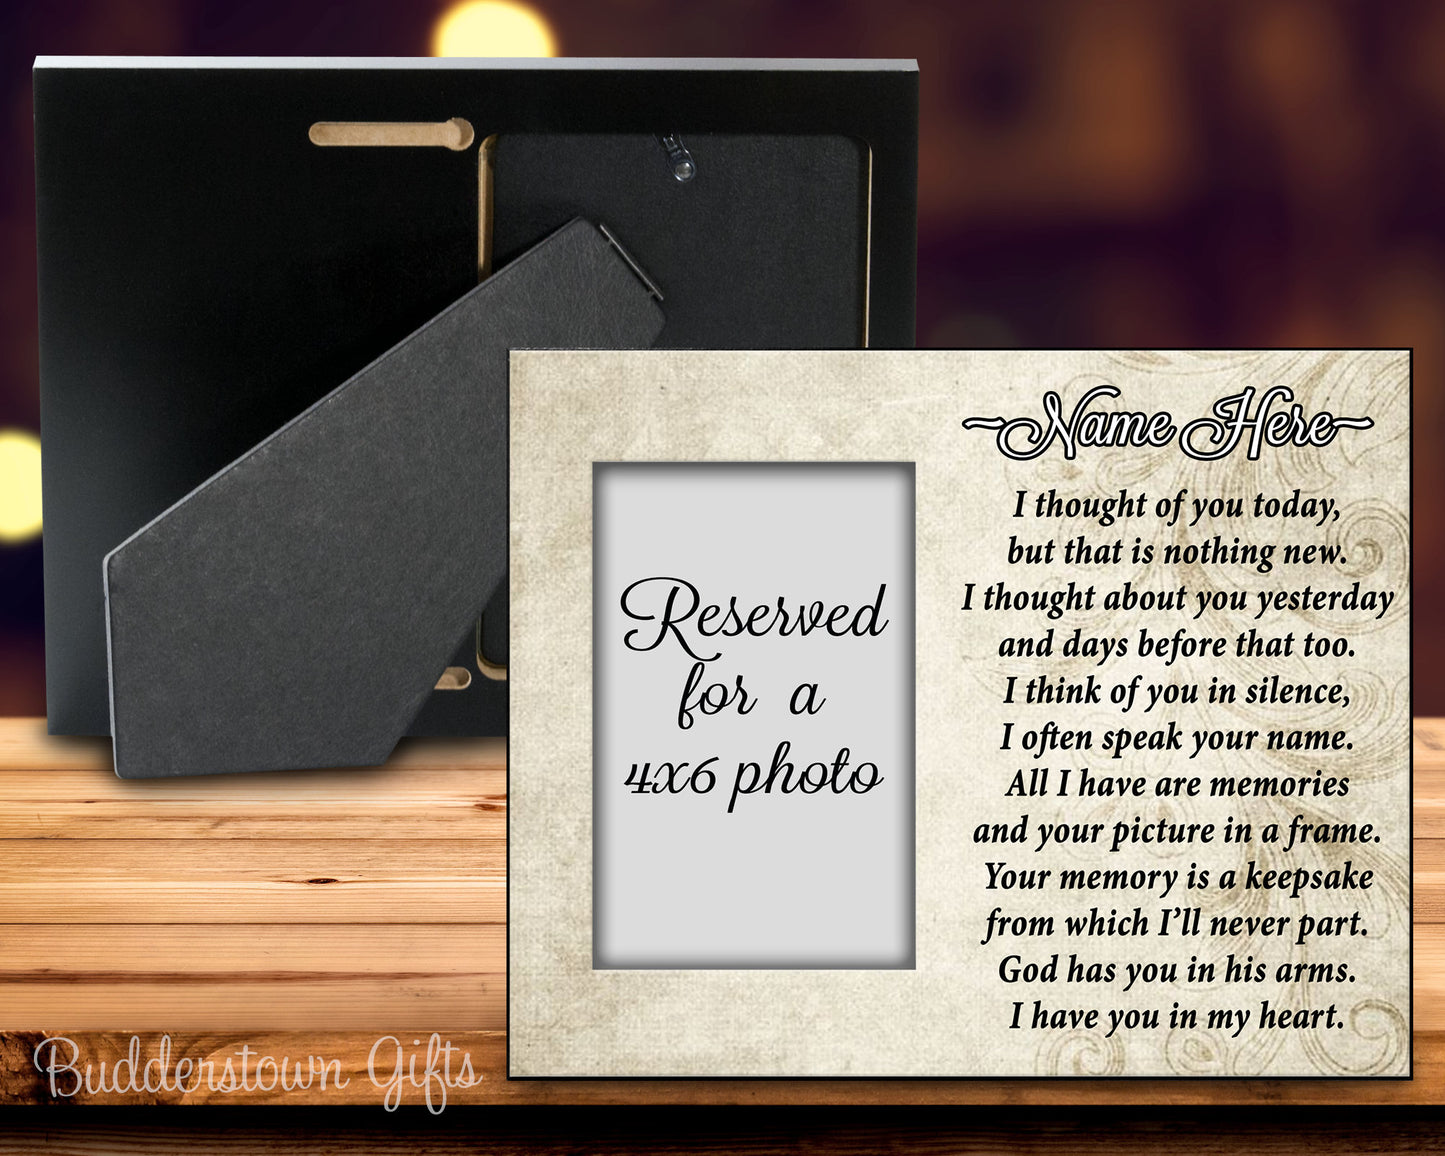 Thought of you today - remembrance, tribute, Memorial Frame, sympathy, loss of loved one